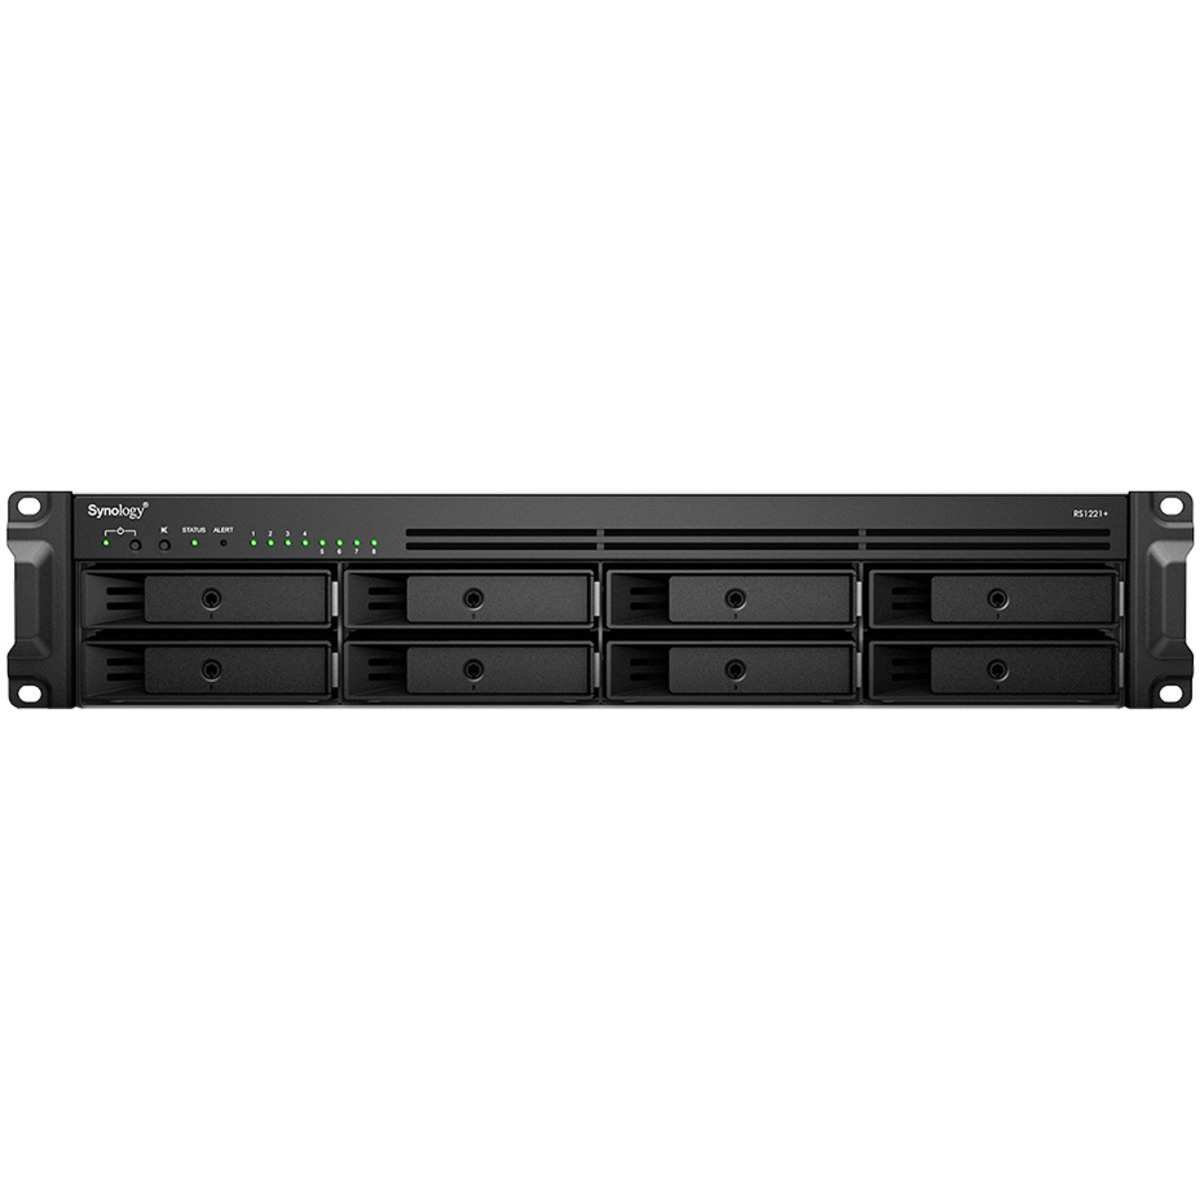 buy $2803 Synology RackStation RS1221+ 48tb RackMount NAS - Network Attached Storage Device 8x6000gb Western Digital Blue WD60EZAZ 3.5 5400rpm SATA 6Gb/s HDD CONSUMER Class Drives Installed - Burn-In Tested - nas headquarters buy network attached storage server device das new raid-5 free shipping usa christmas new year holiday sale RackStation RS1221+